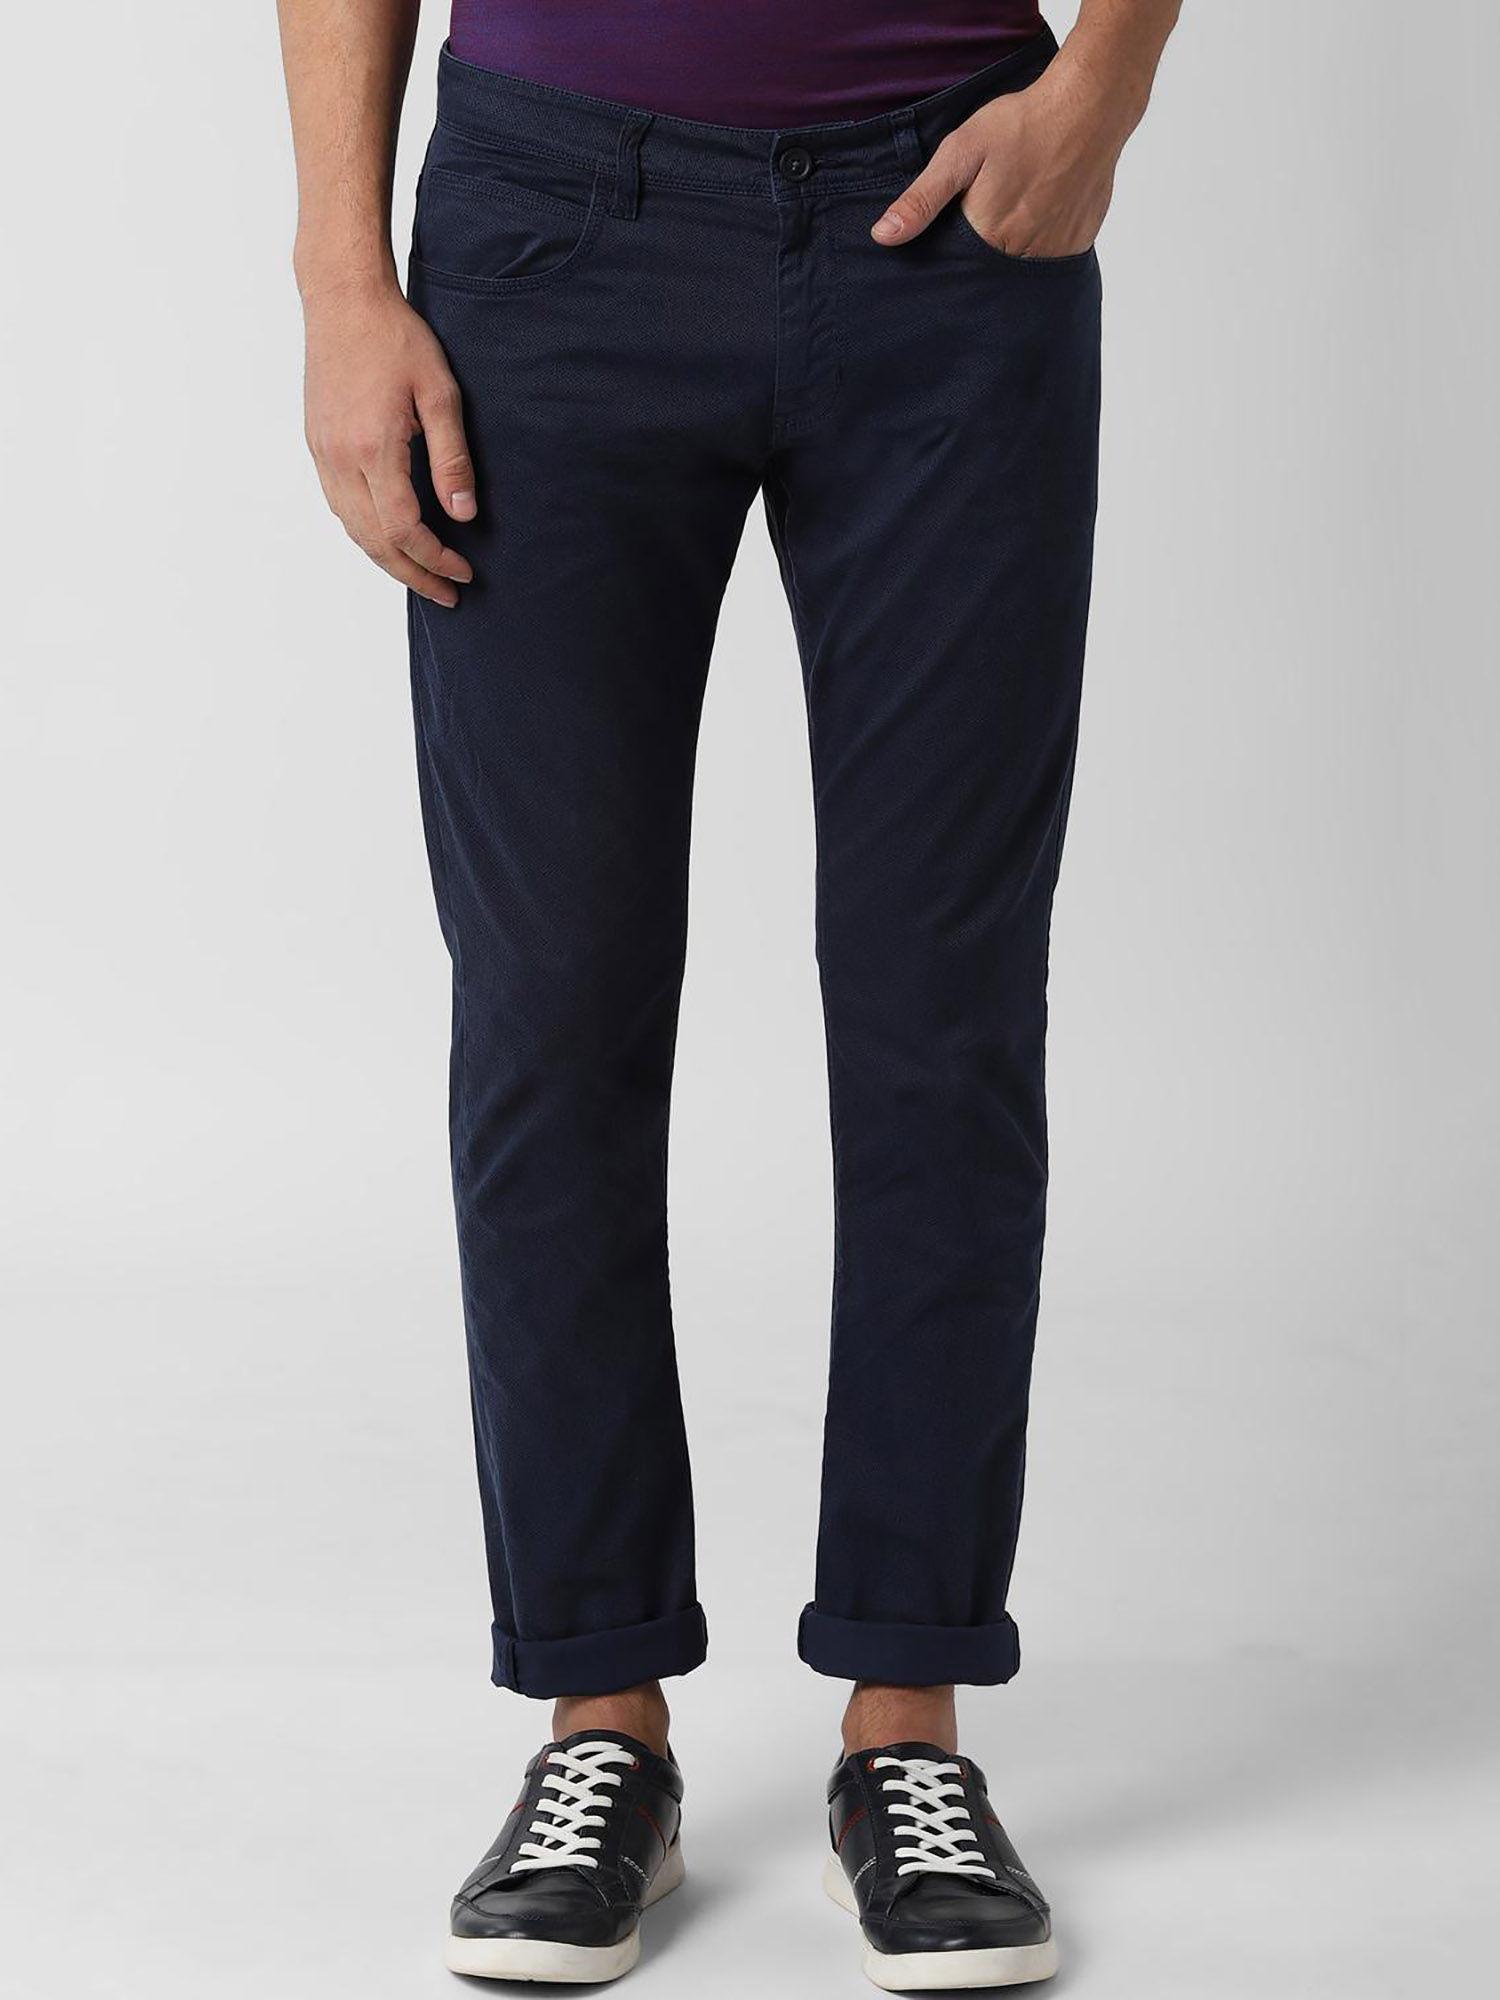 navy blue printed casual trousers